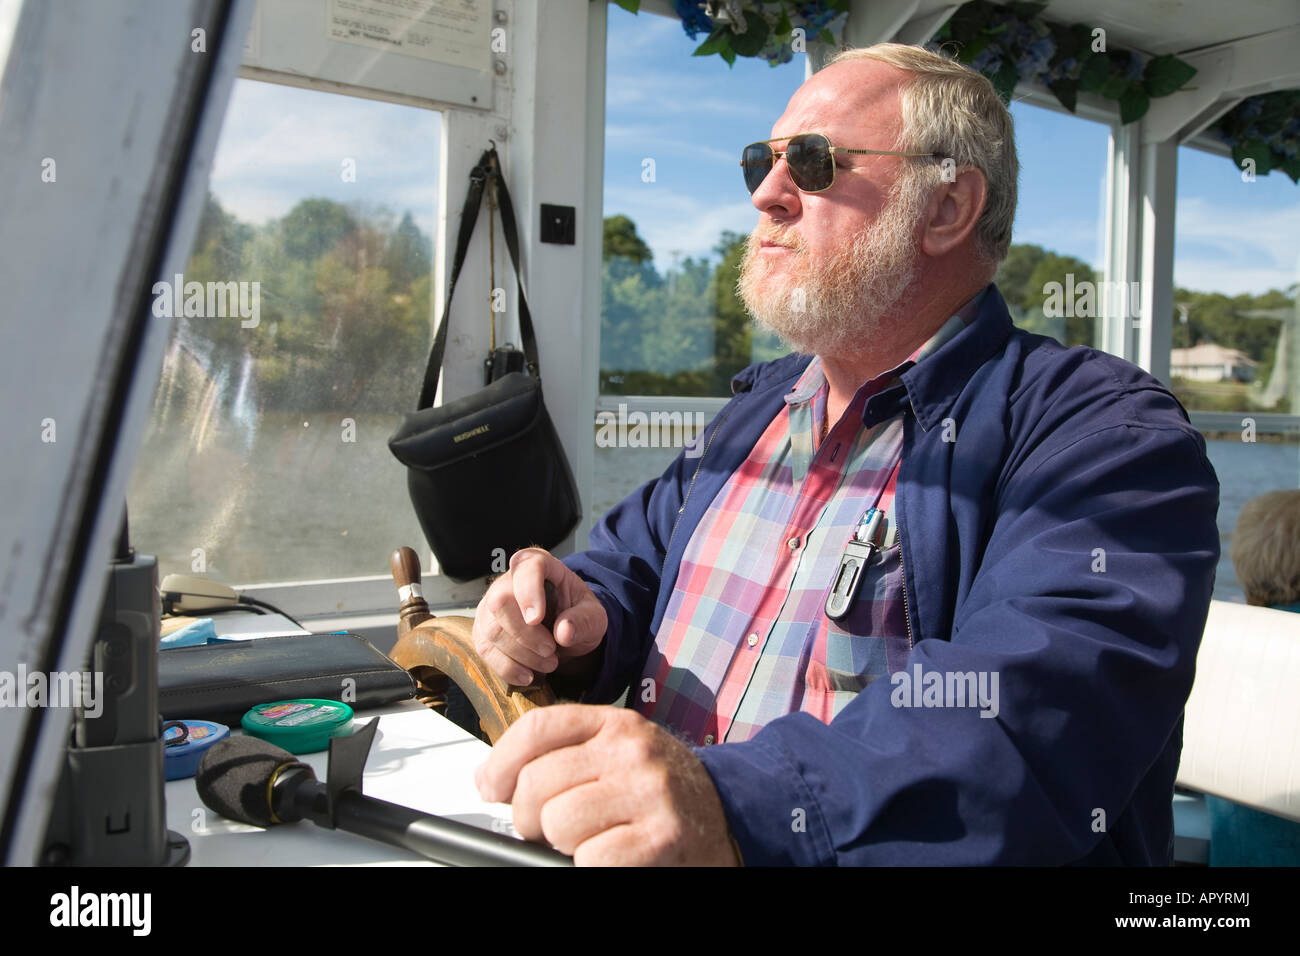 IOWA LeClaire Captain of river tour boat on Mississippi River at wheel looking ahead wearing sunglasses Stock Photo